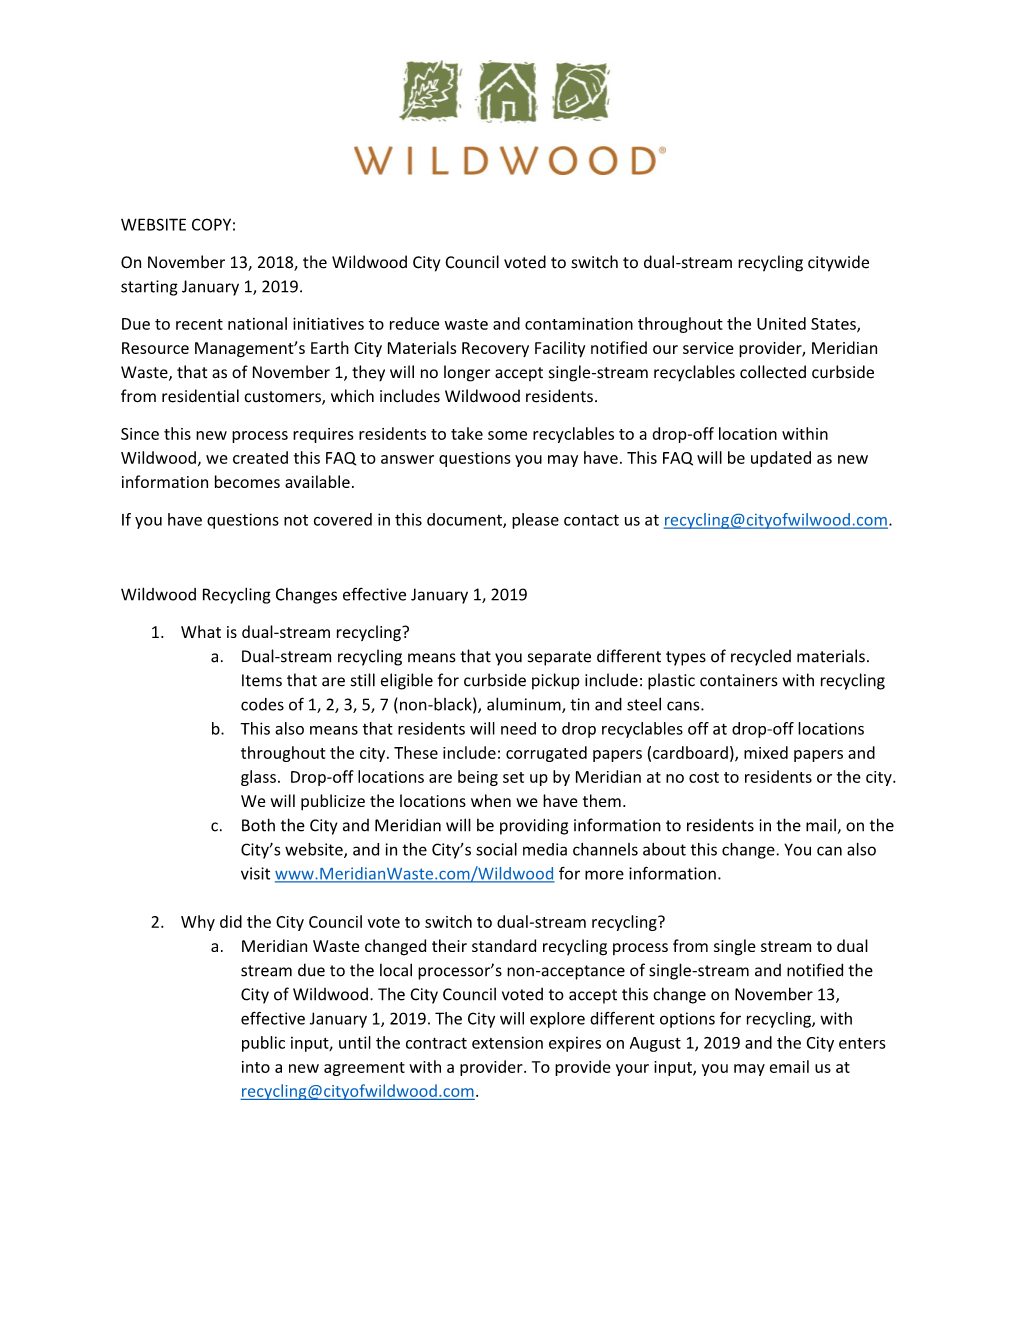 On November 13, 2018, the Wildwood City Council Voted to Switch to Dual-Stream Recycling Citywide Starting January 1, 2019